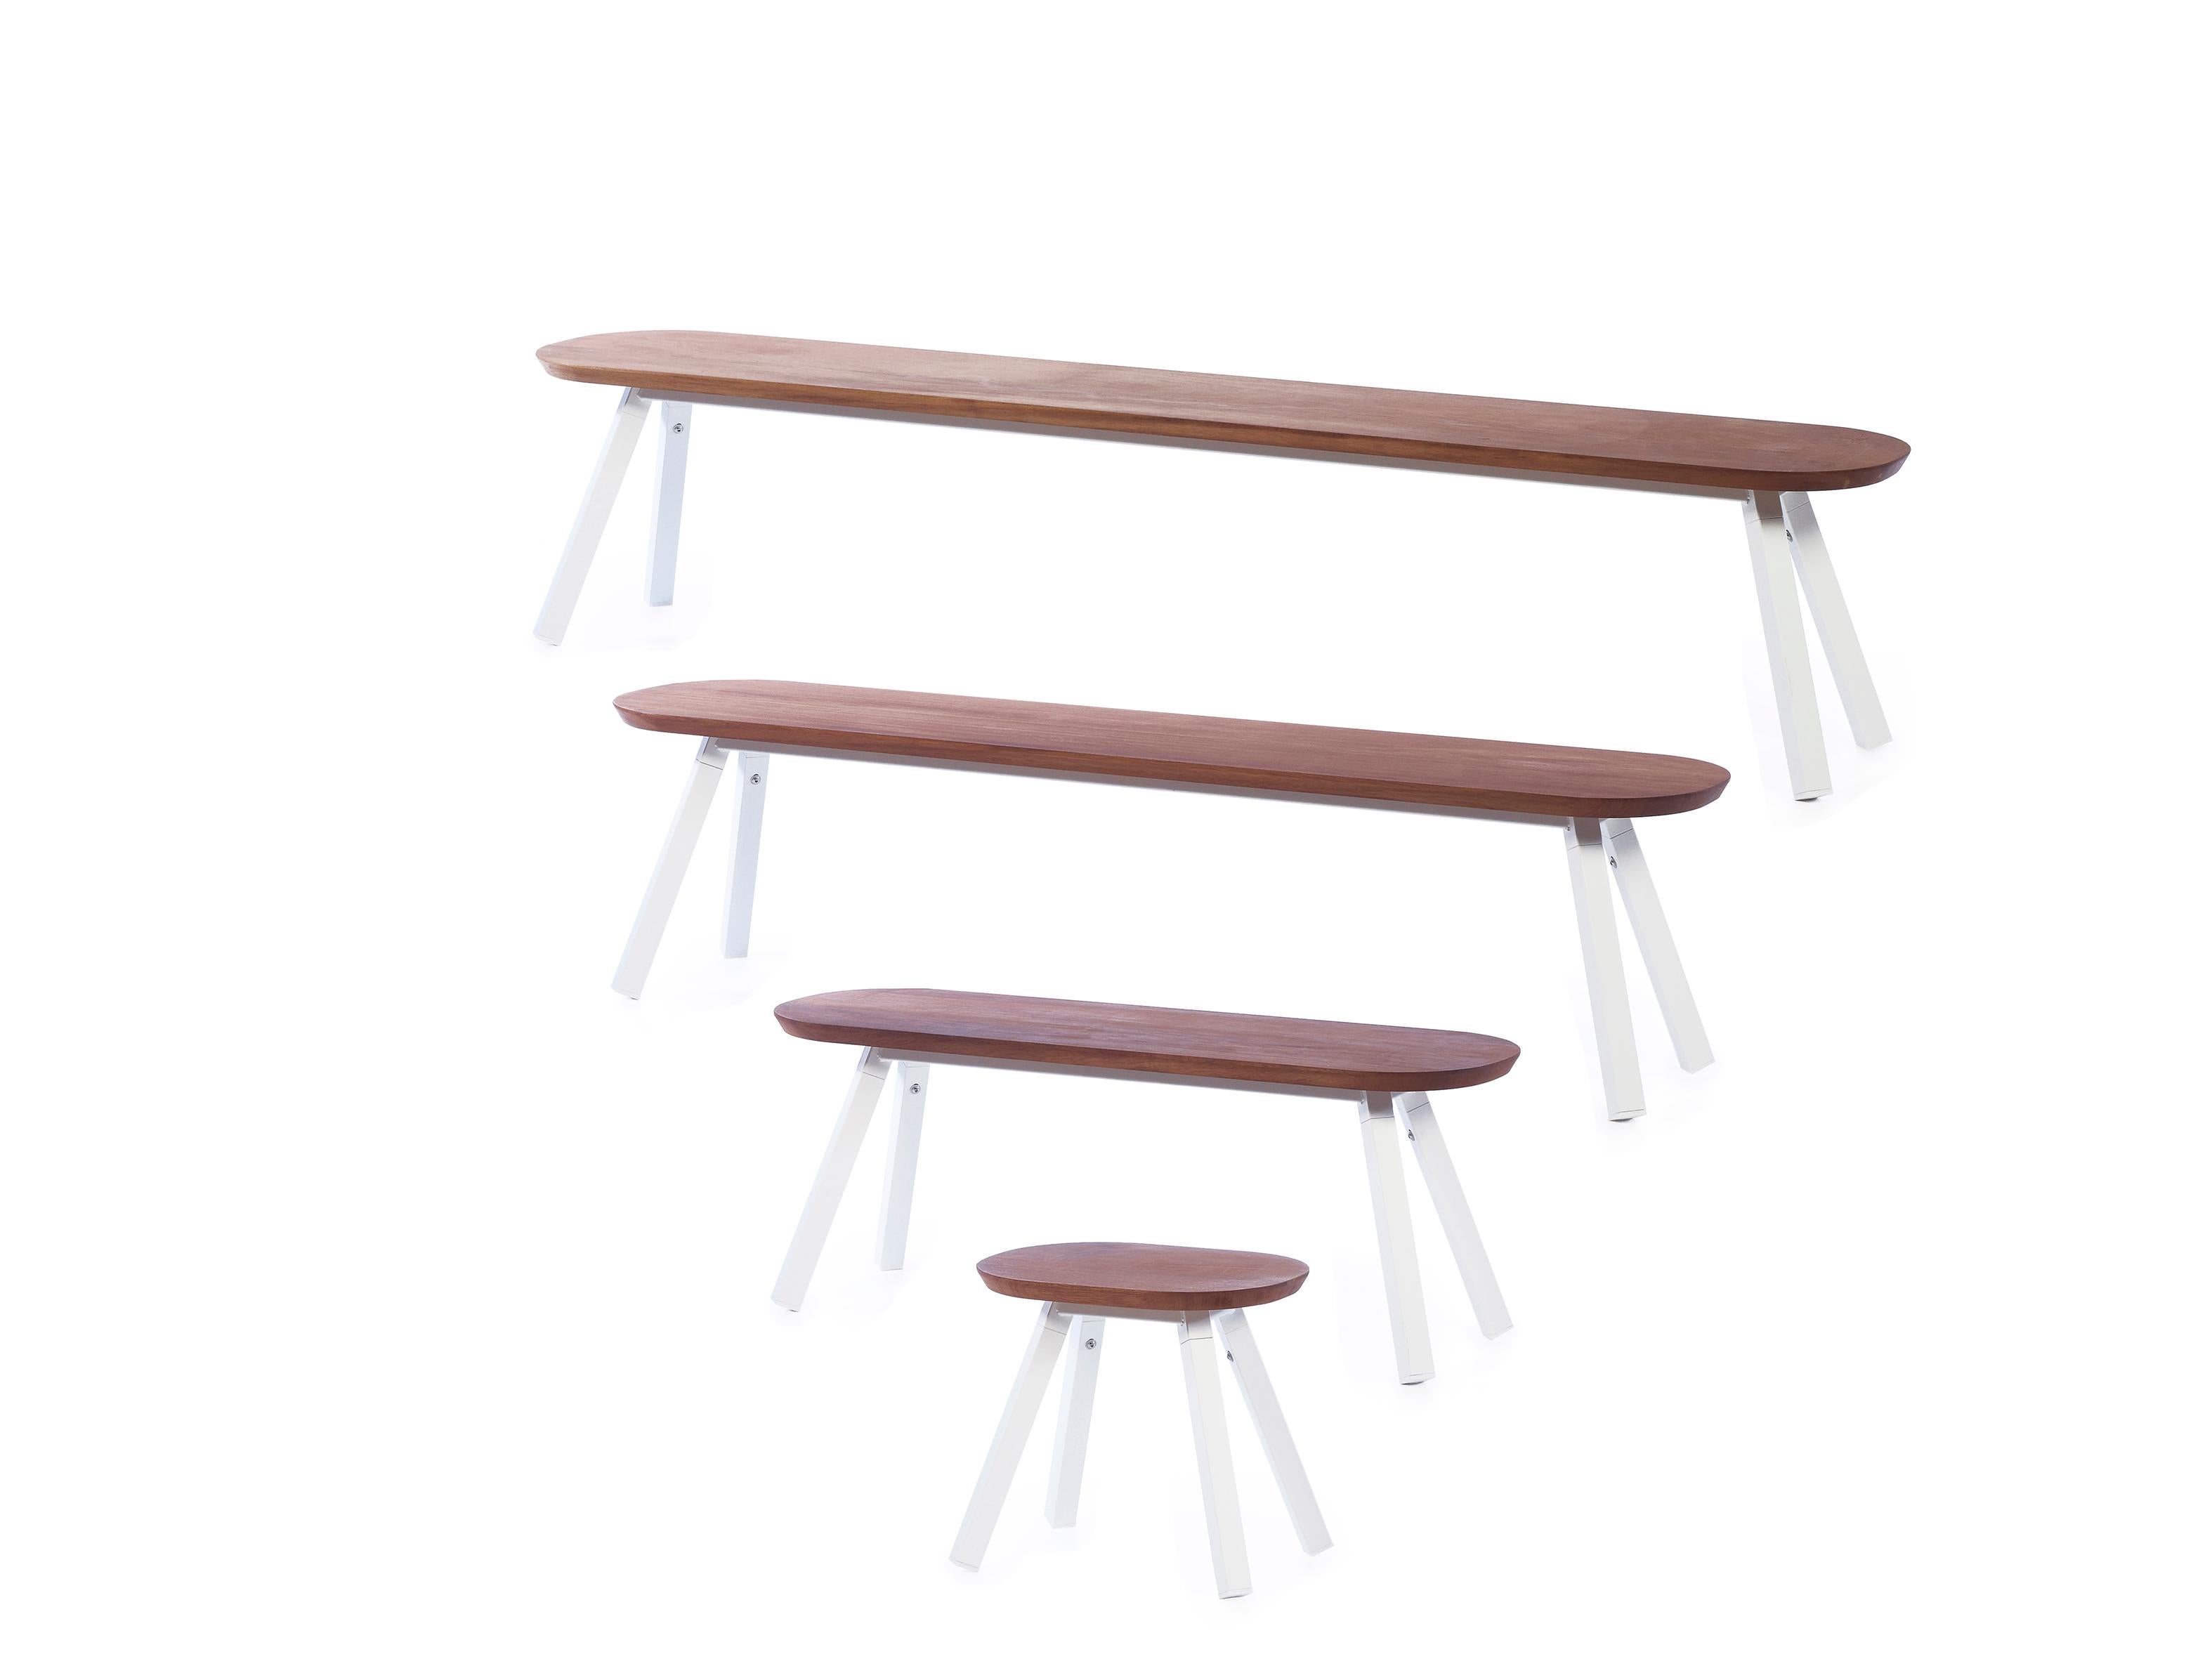 Steel RS Barcelona You and Me 120 Bench in Iroko and White by A.P.O. For Sale